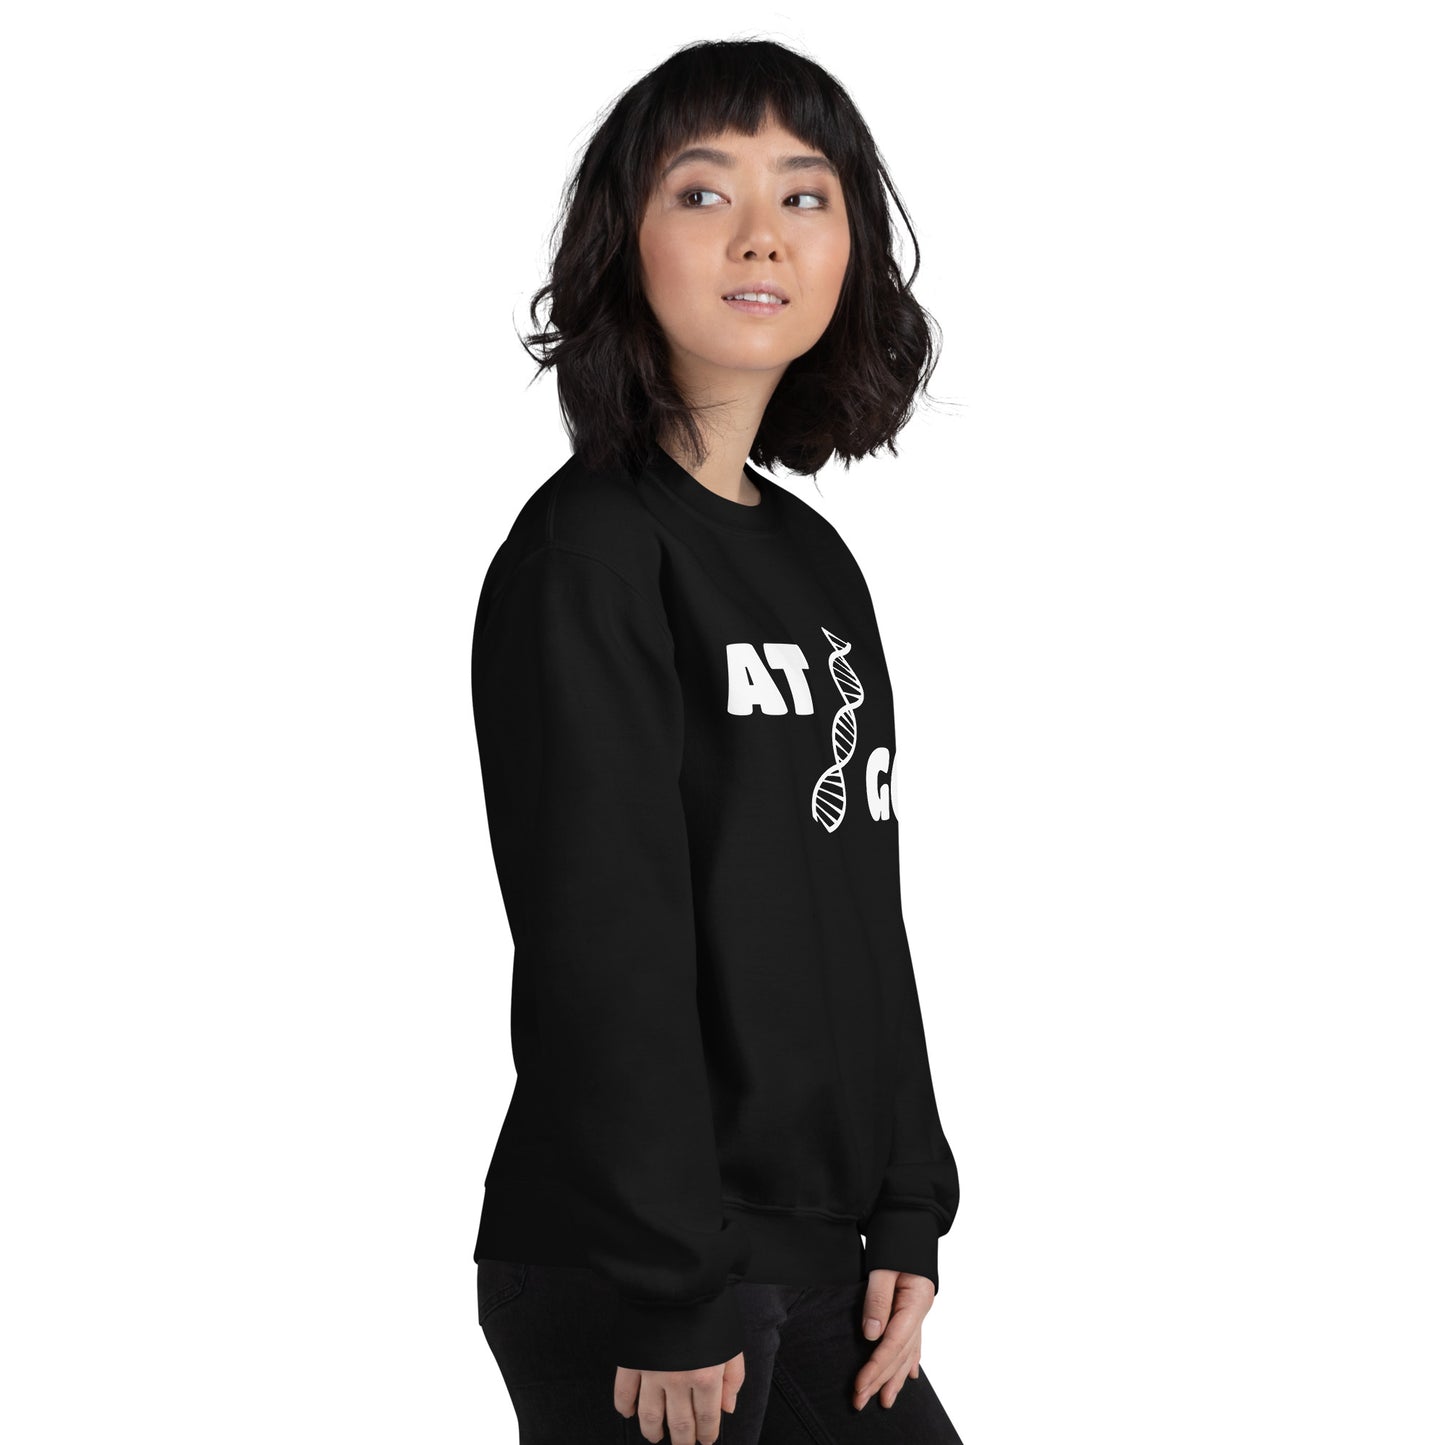 Women with black sweatshirt with image of a DNA string and the text "ATGC"